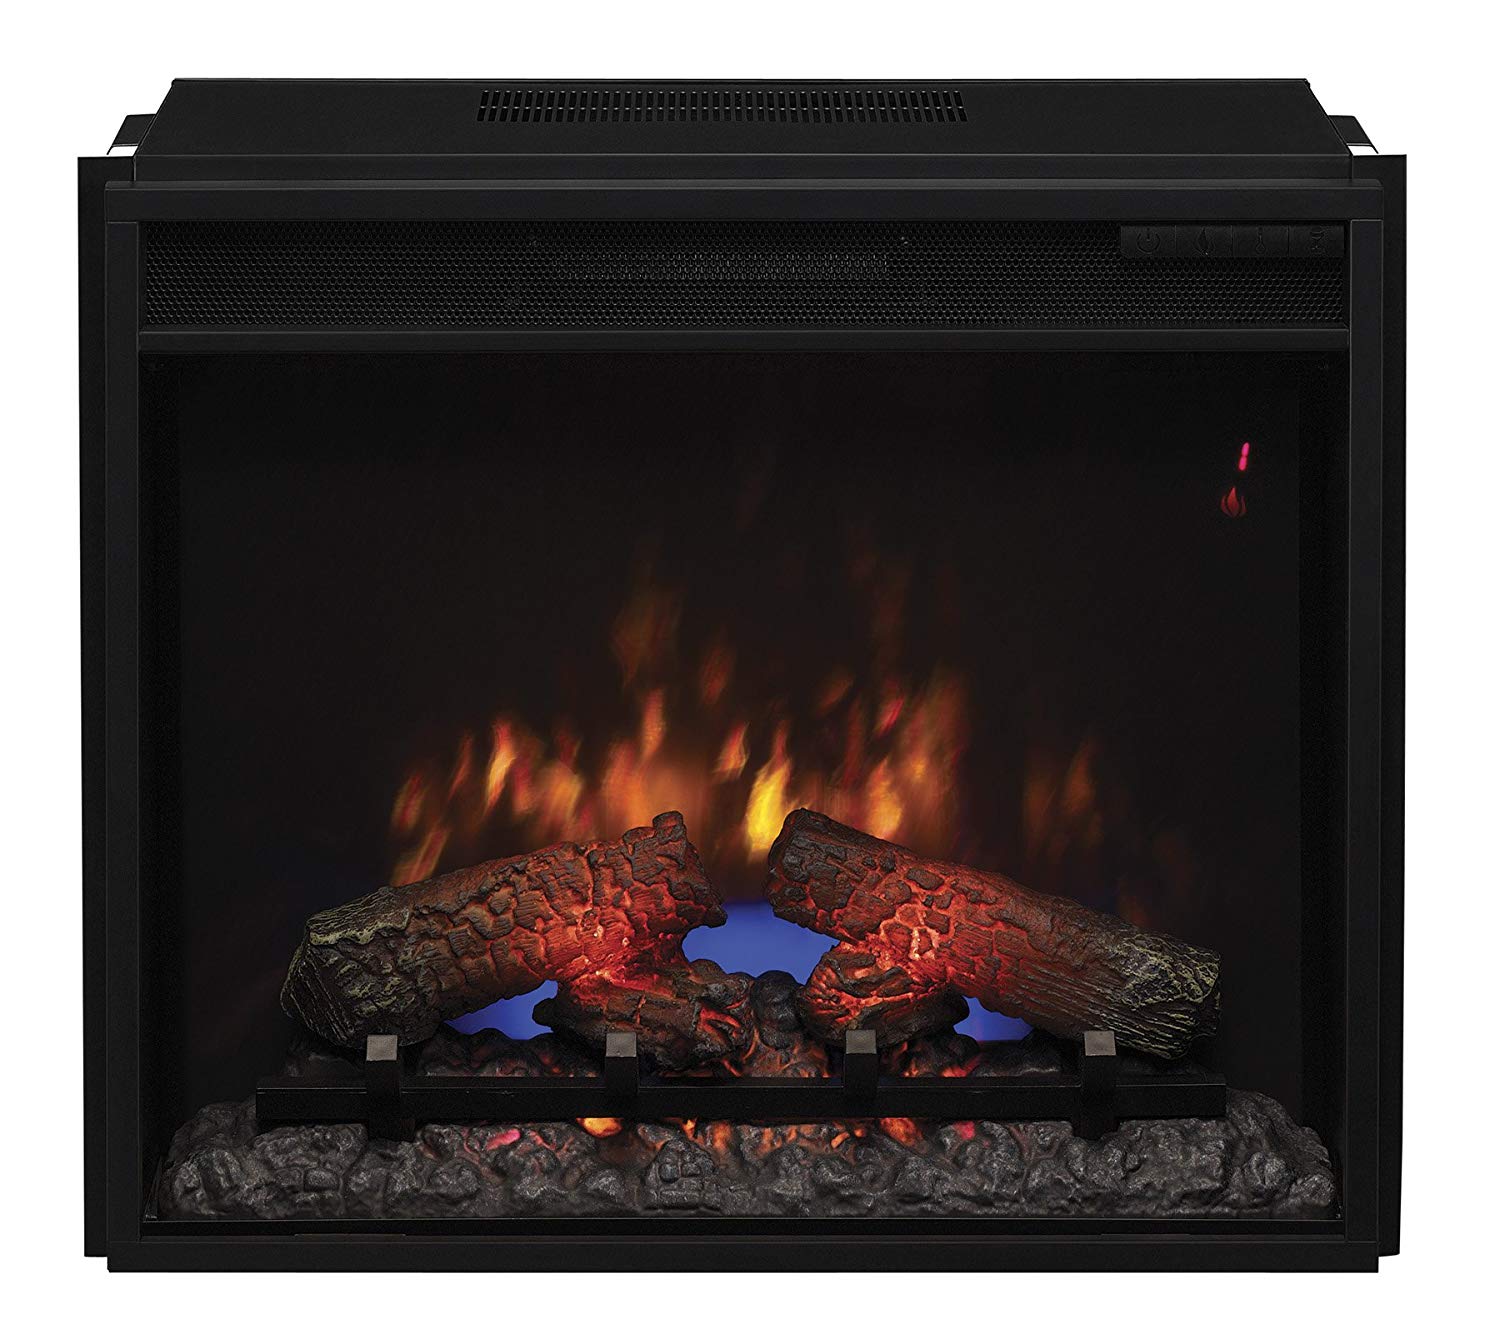 Twin Star Electric Fireplace Troubleshooting Best Of Classicflame 23ef031grp 23&quot; Electric Fireplace Insert with Safer Plug